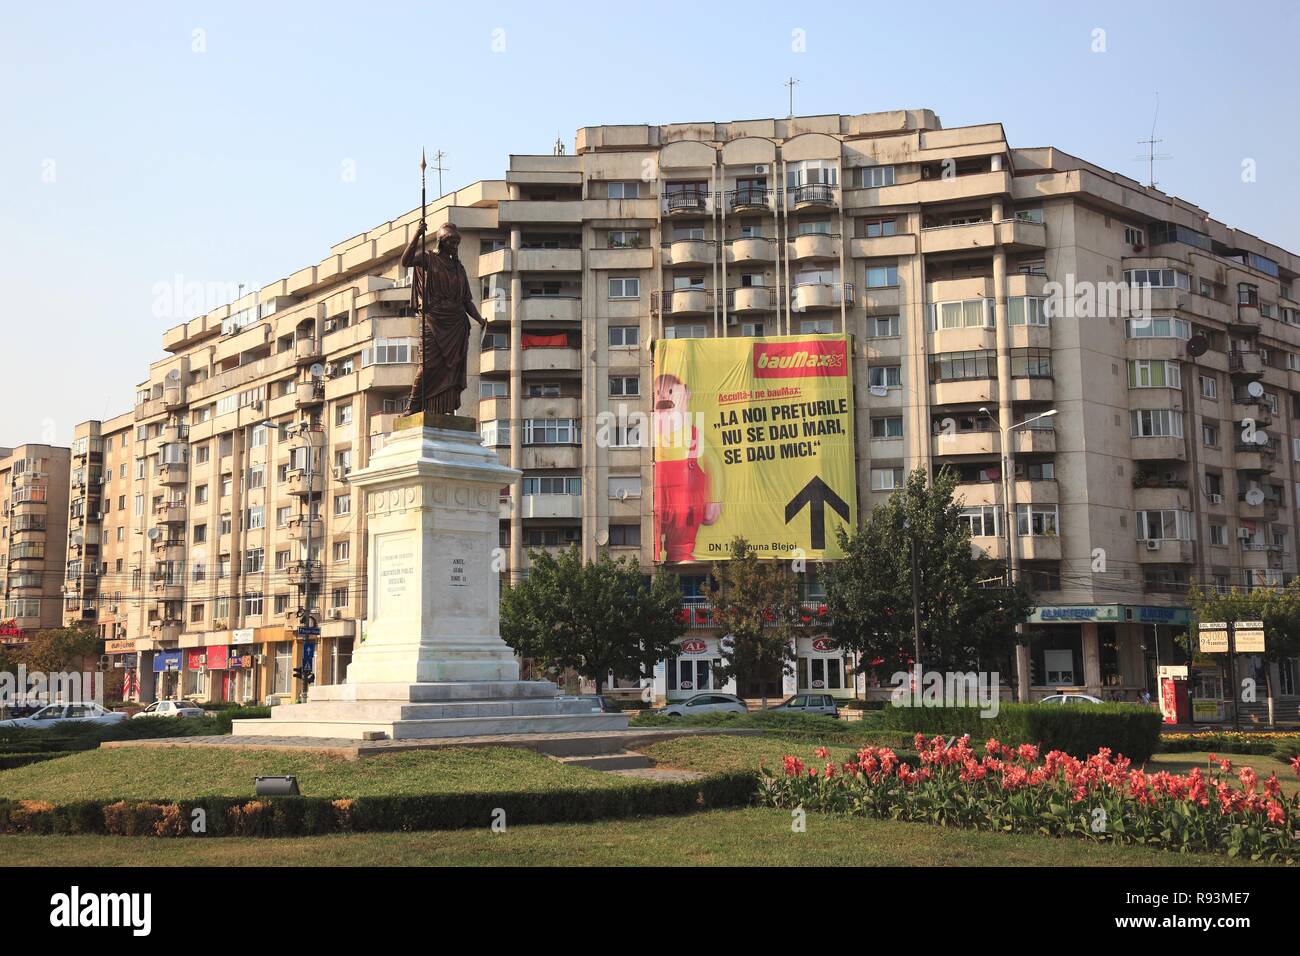 Prefabricated concrete apartment building with a large advertising poster for a hardware store, Piata Eroilor, Ploiesti Stock Photo